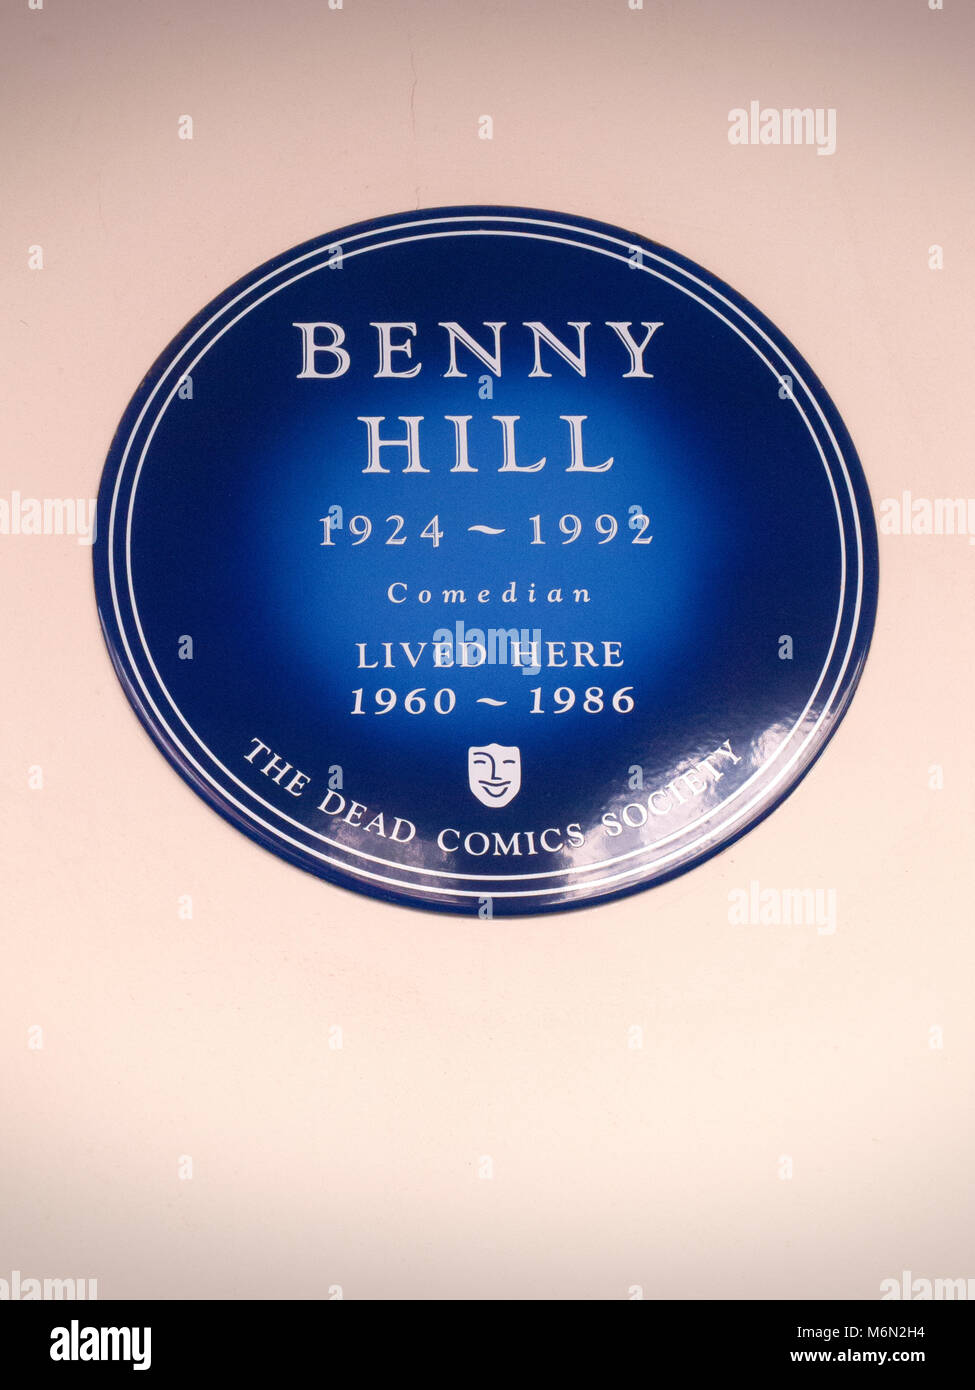 Benny Hill Wall Plaque, London Stock Photo